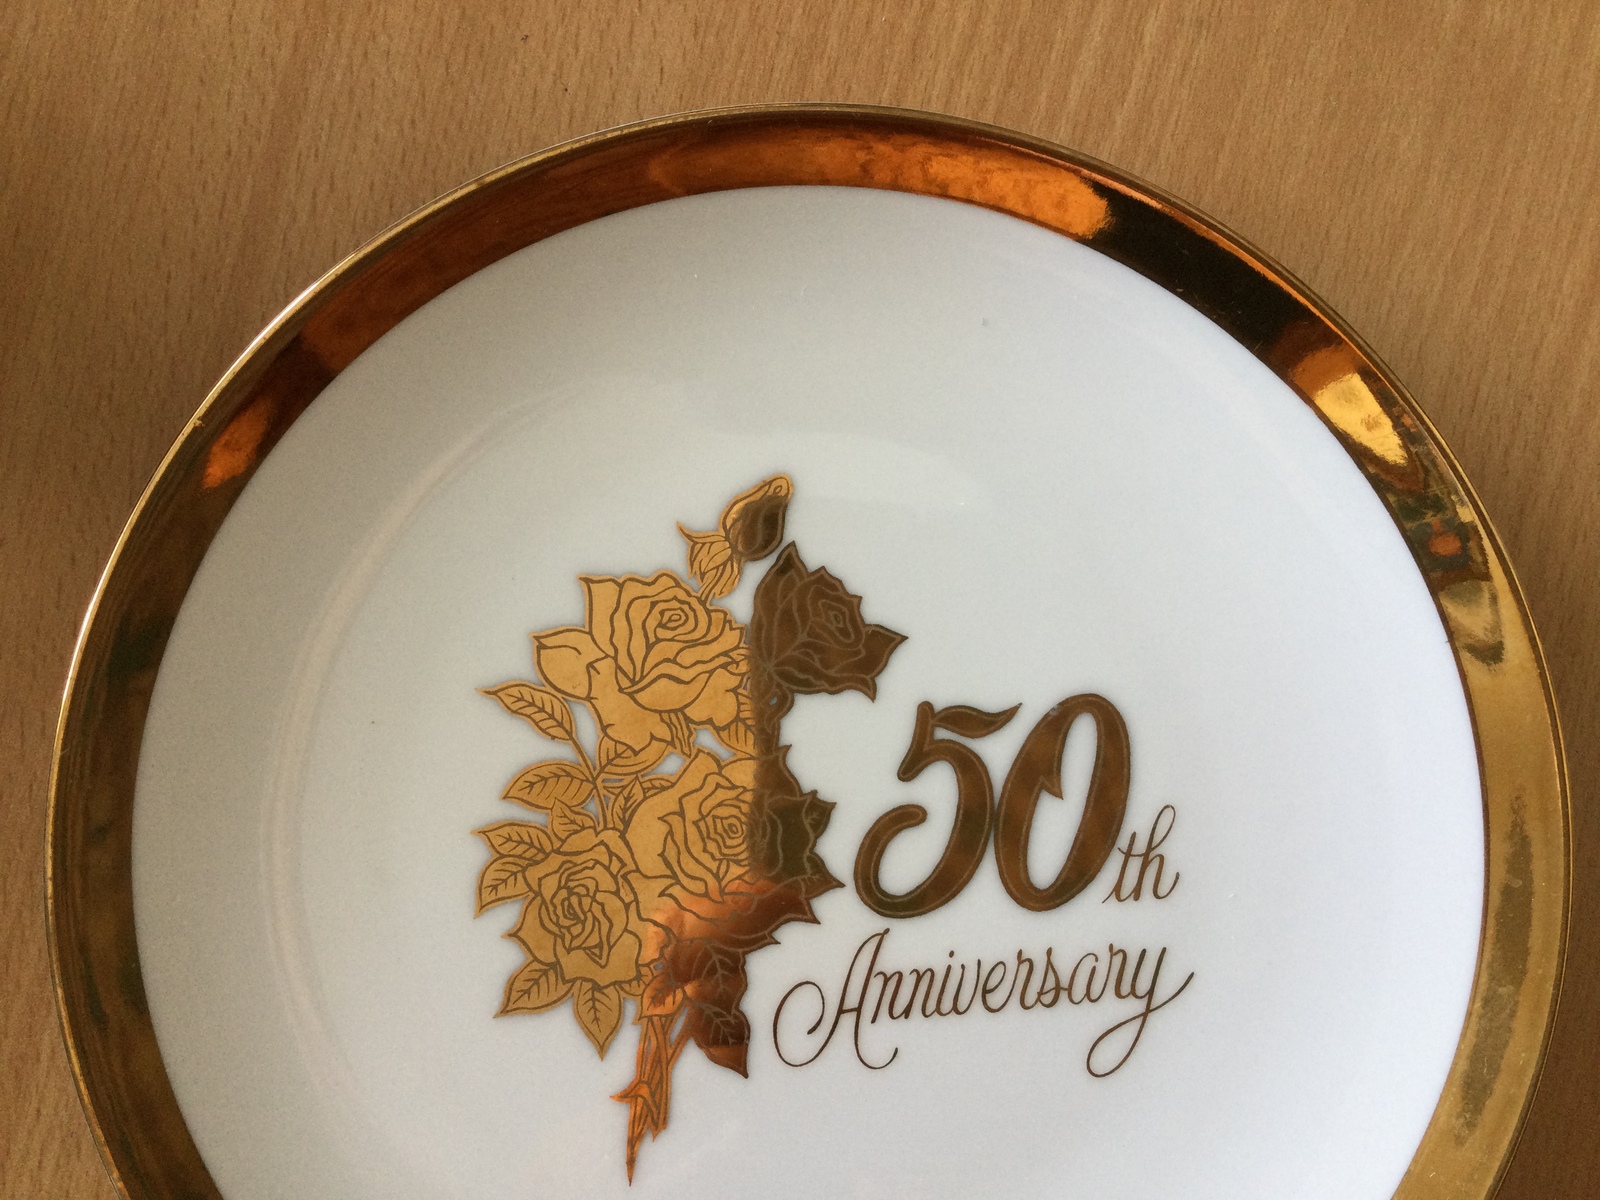 Primary image for Saji fine china Japan 50th anniversary plate gold edge & gold flower free shippi